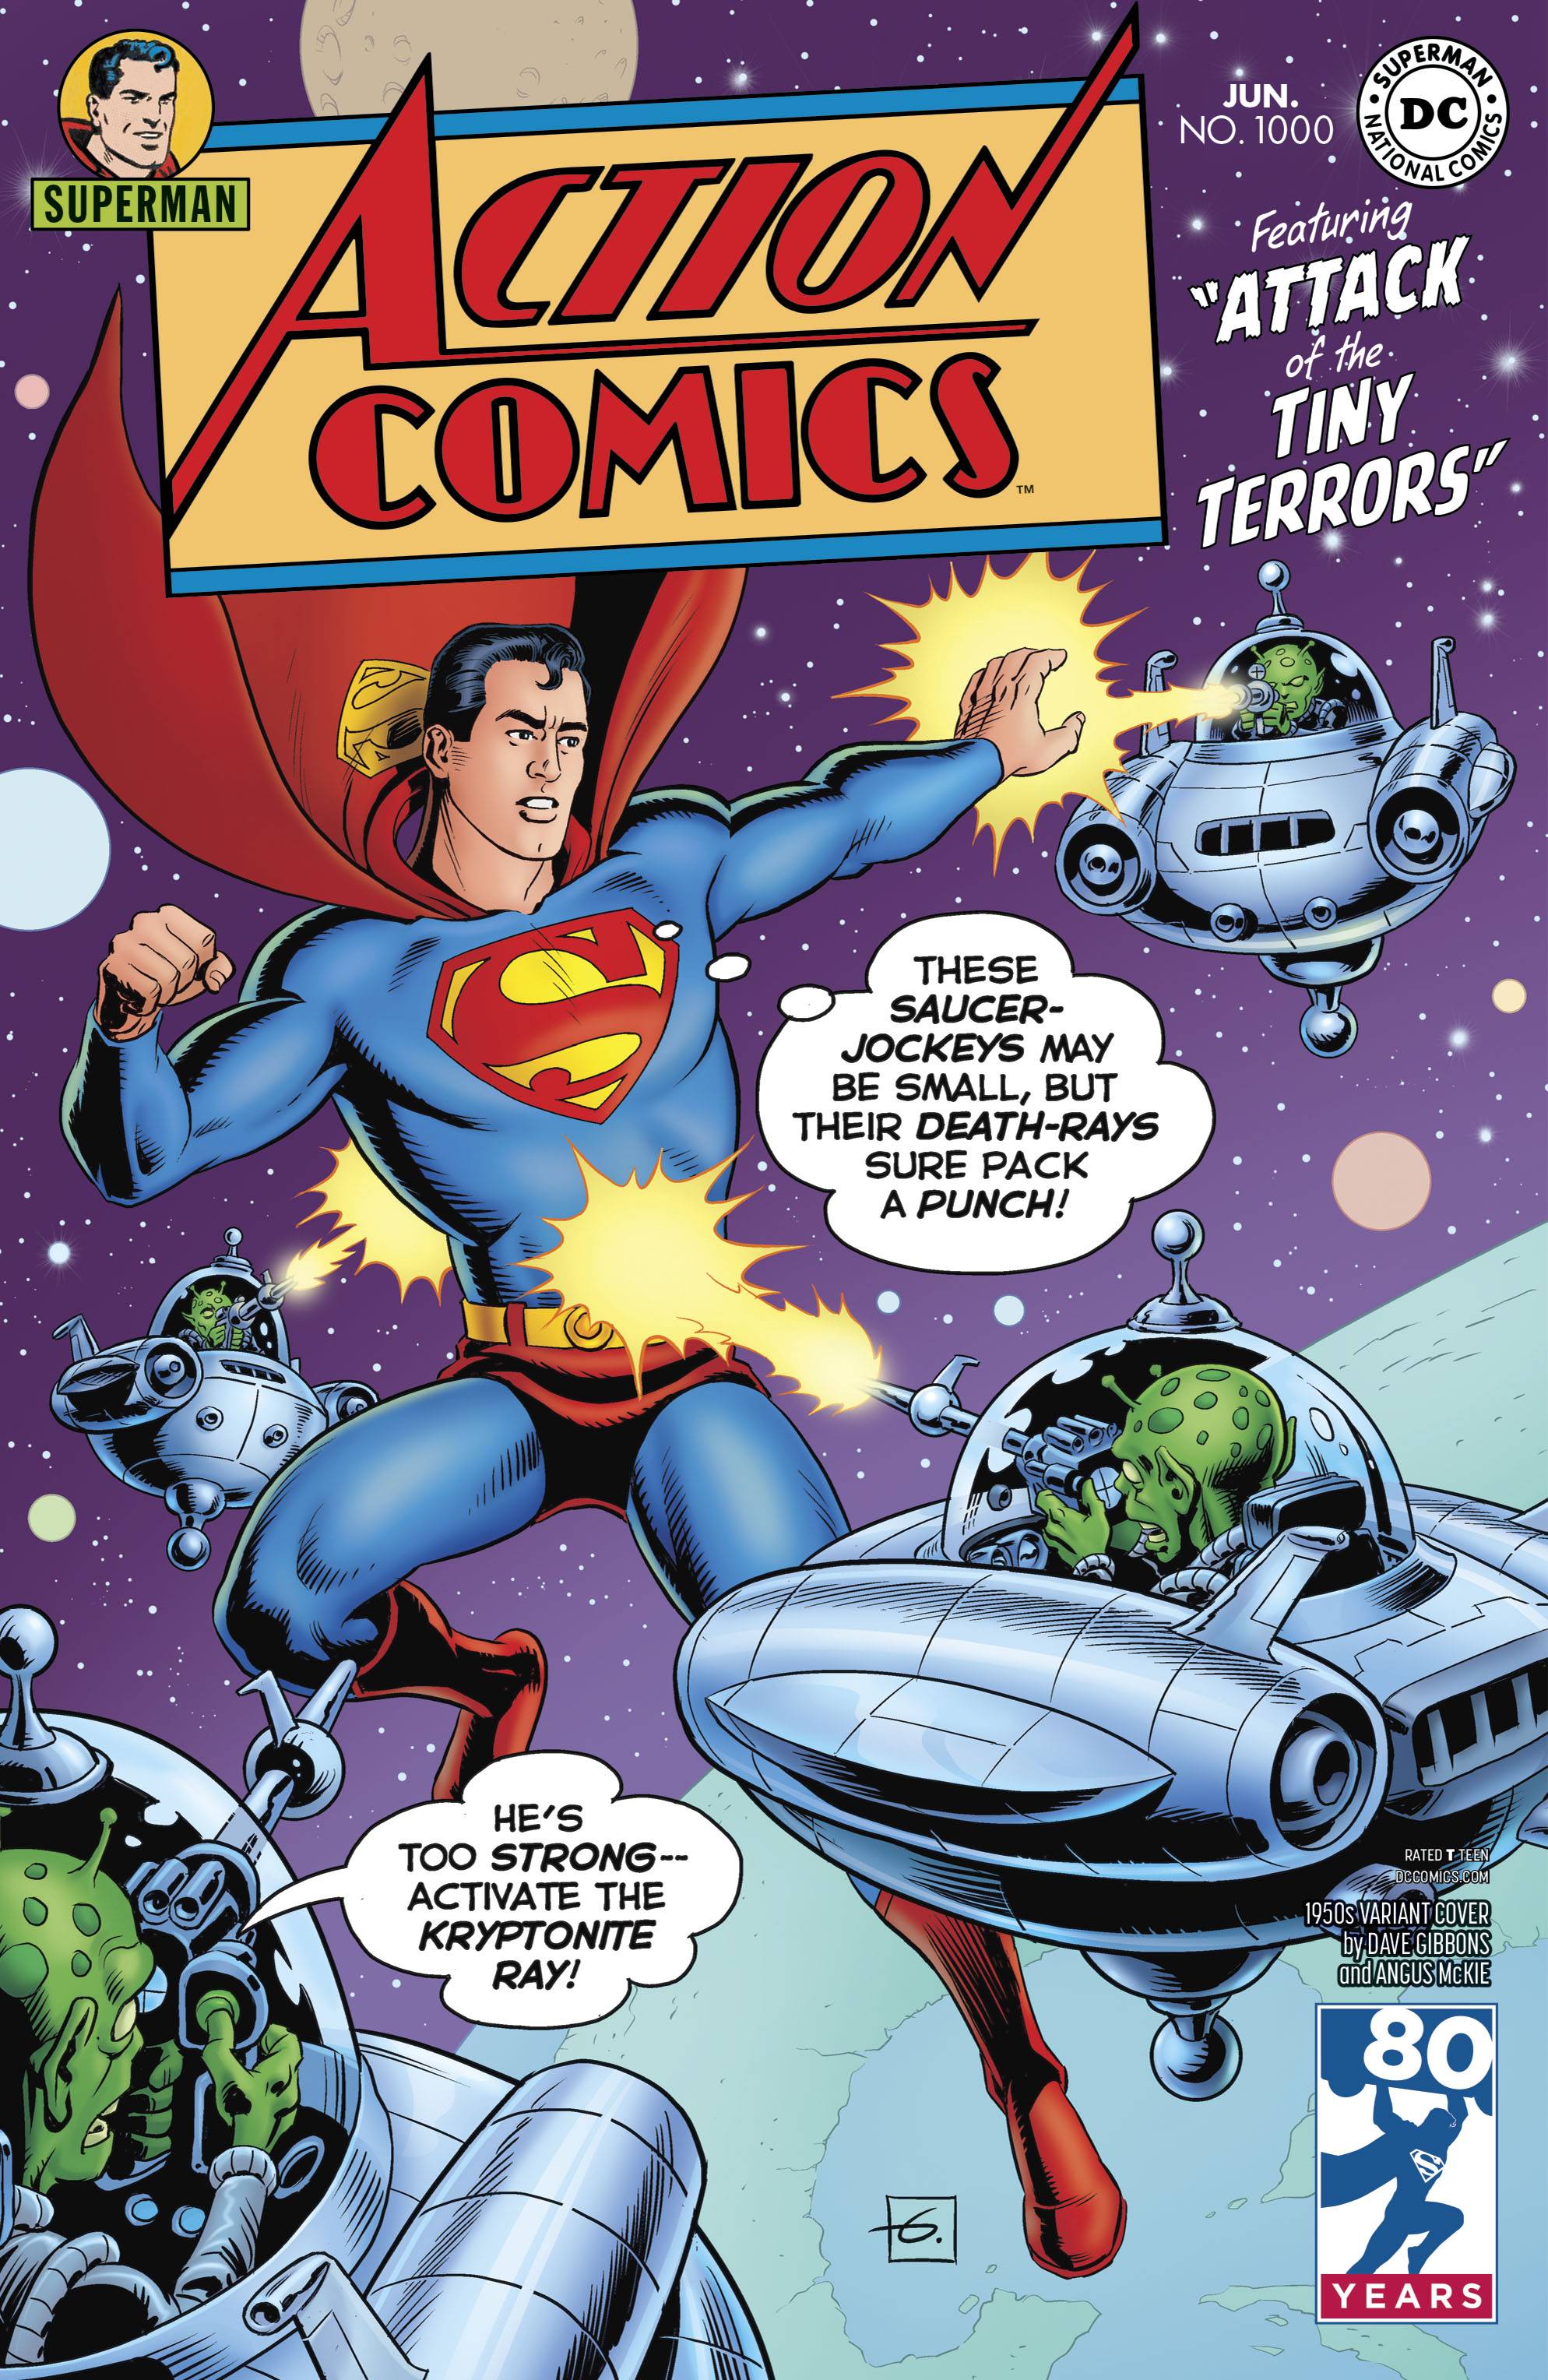 Action Comics #1000 1950s Variant Edition (1938)